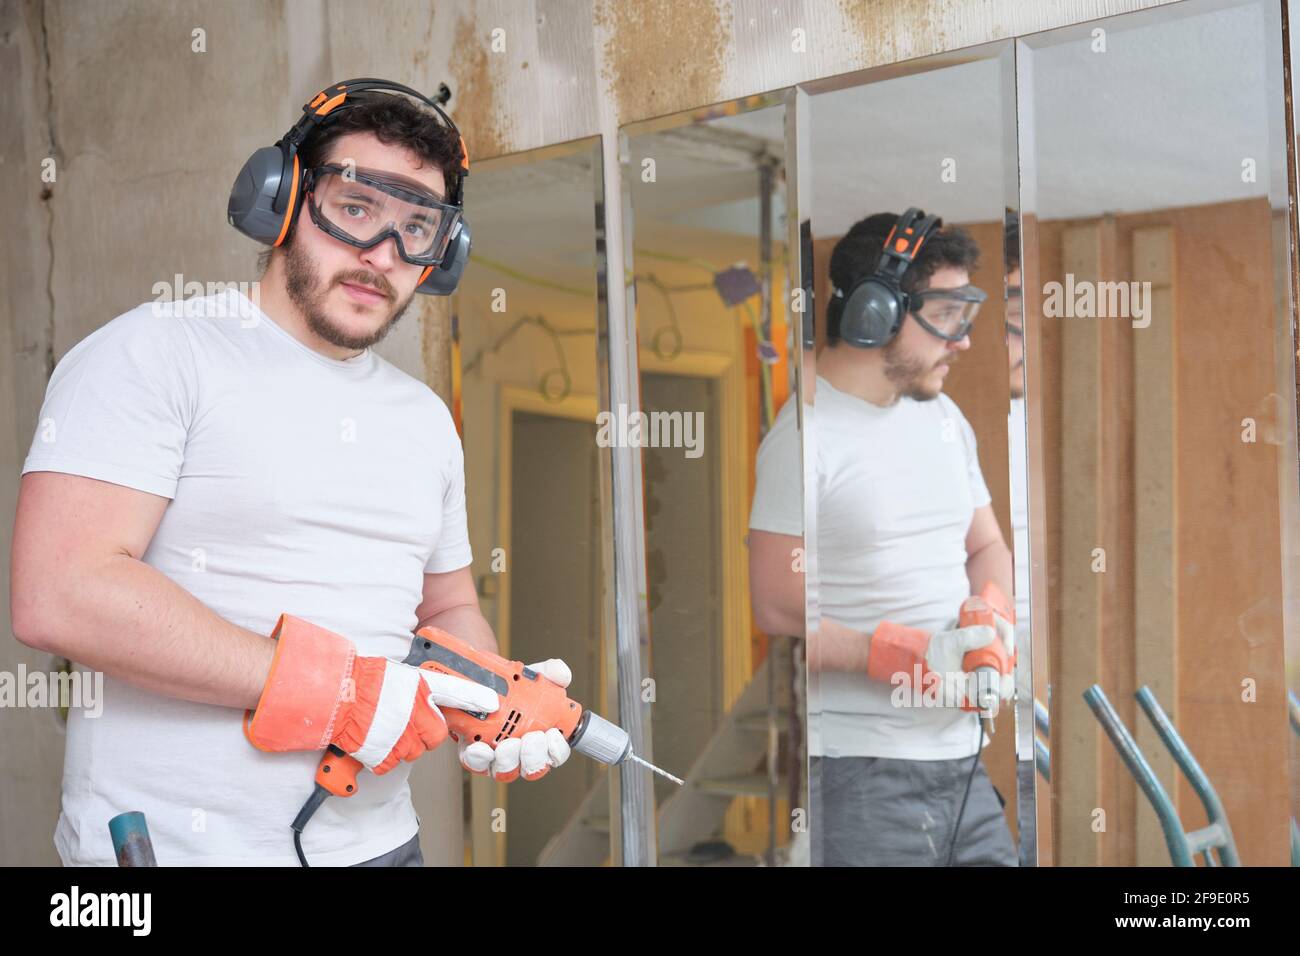 Builder holding a drill and looking at camera at the construction site. Construction worker wearing safety gloves, glasses and earmuffs. Stock Photo